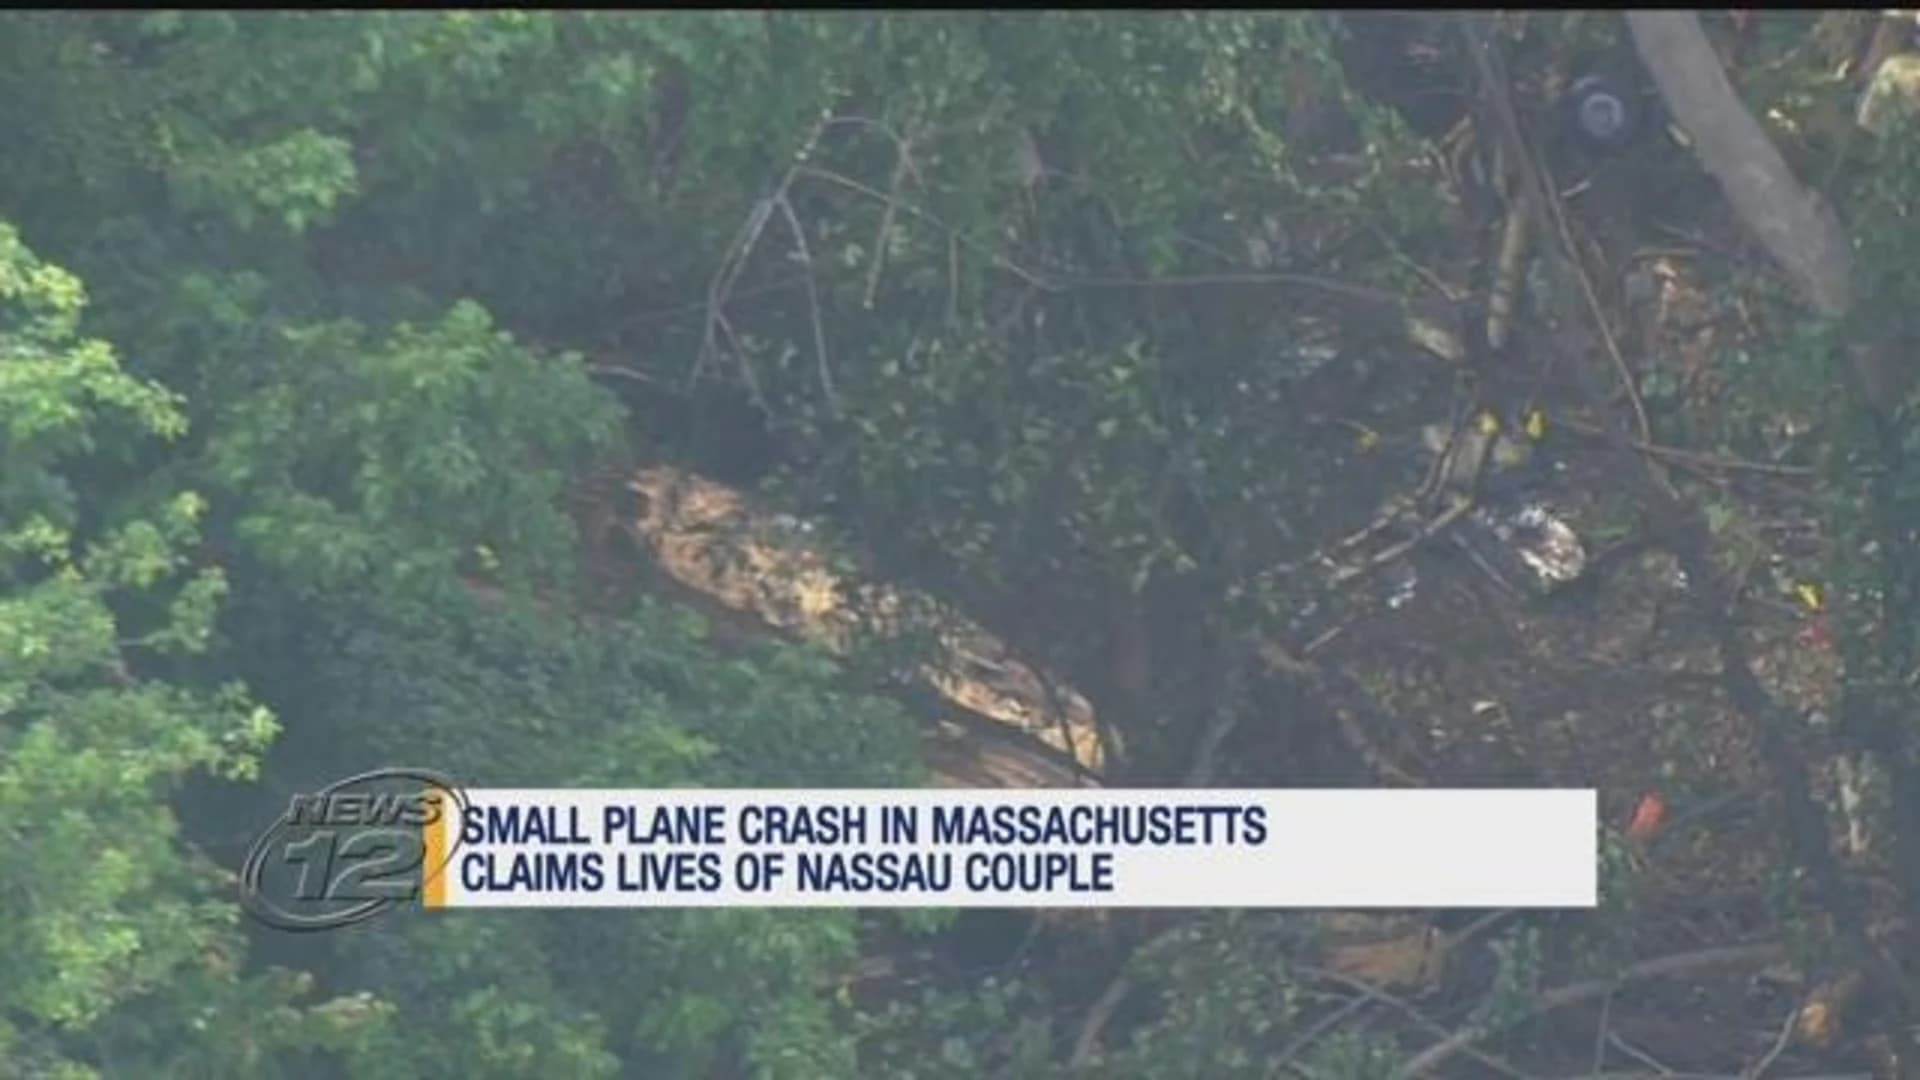 Small plane crash in Massachusetts claims the lives of Nassau couple